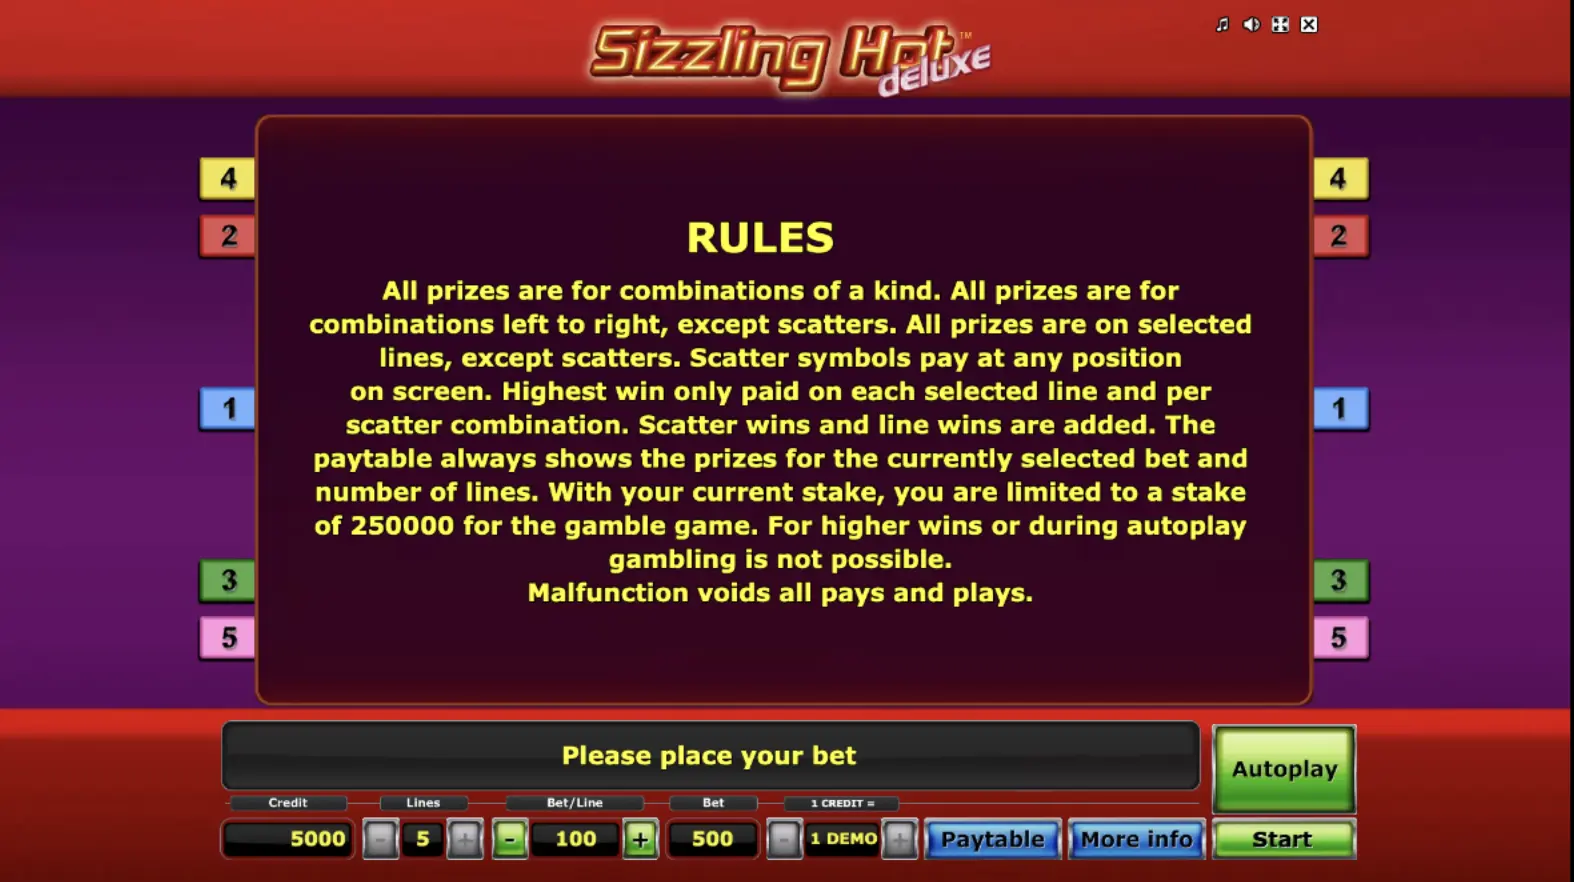 A Sizzling Hot Deluxe casino